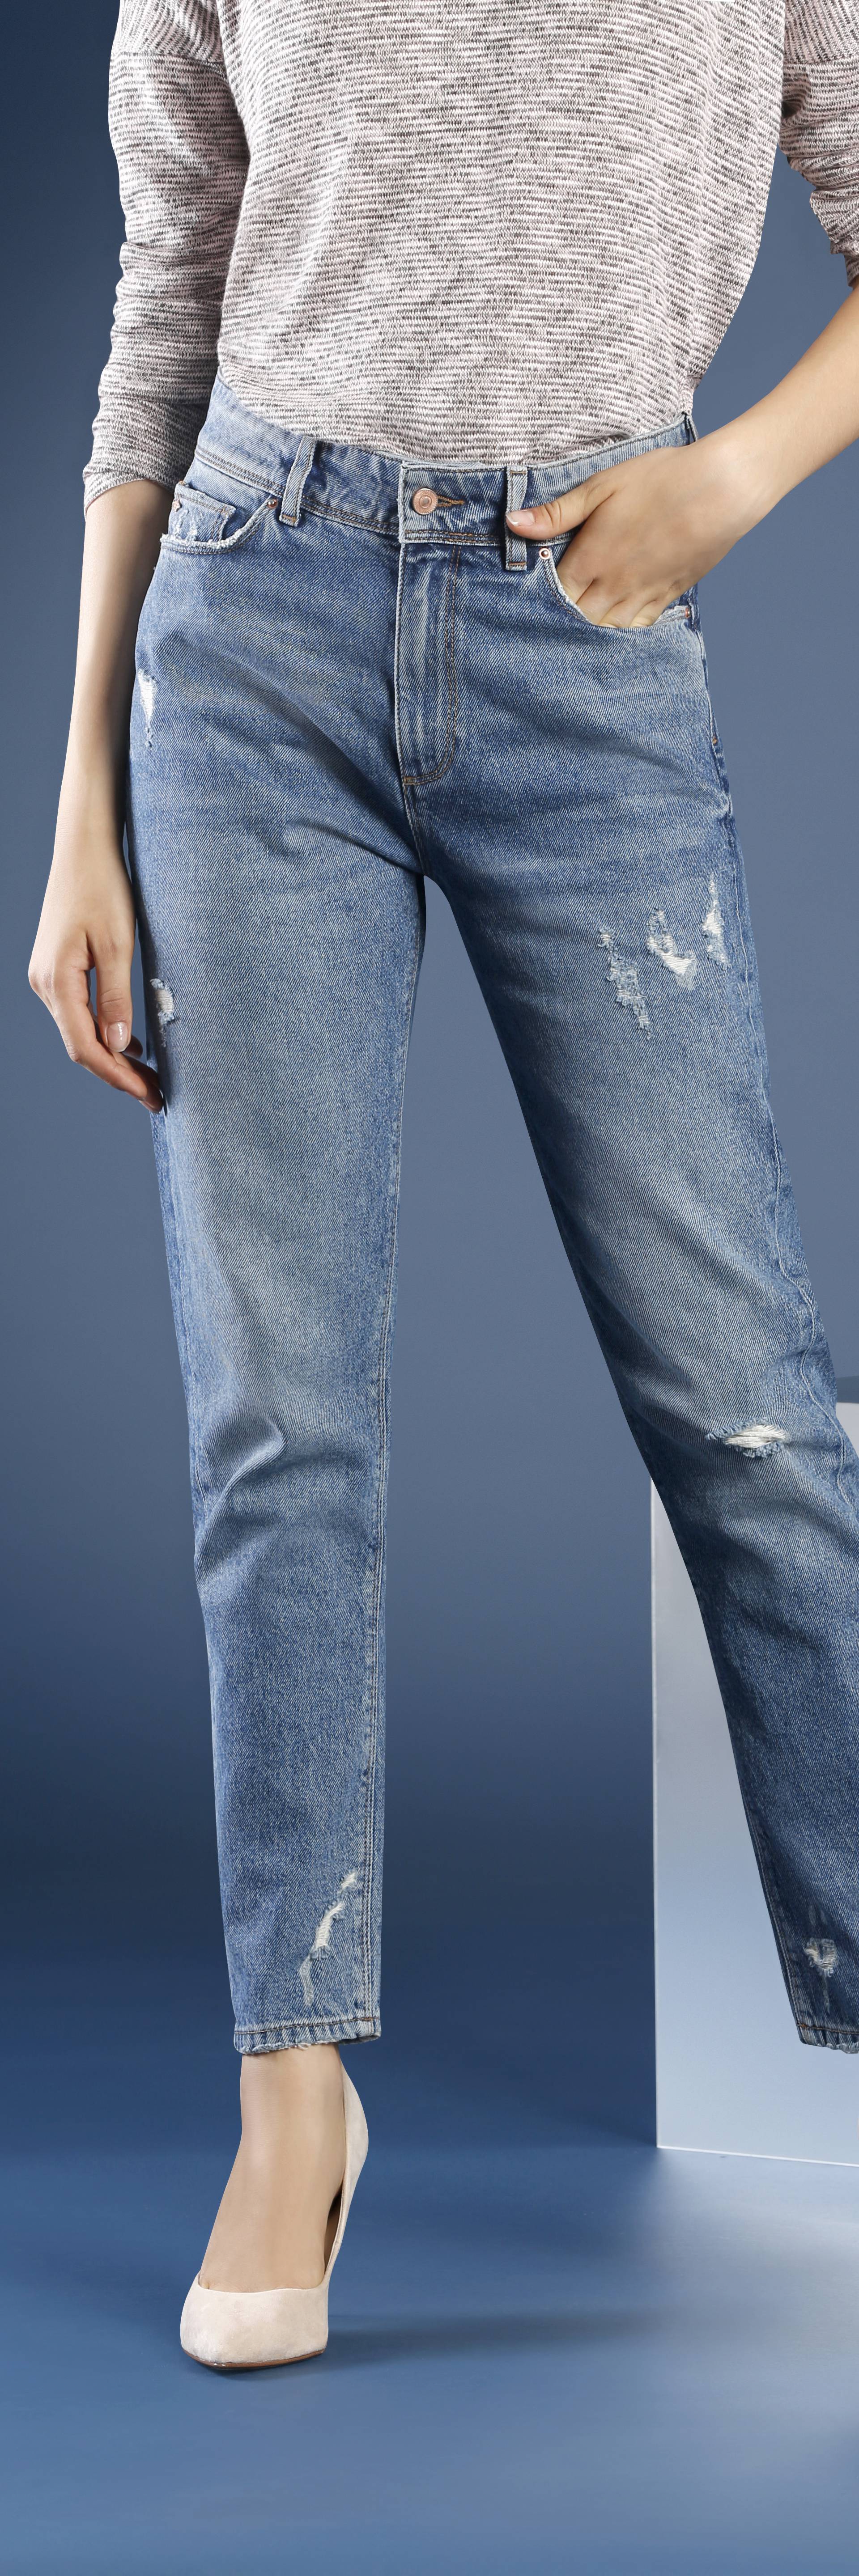 Young fashion woman's legs in jeans and stiletto shoes on blue background